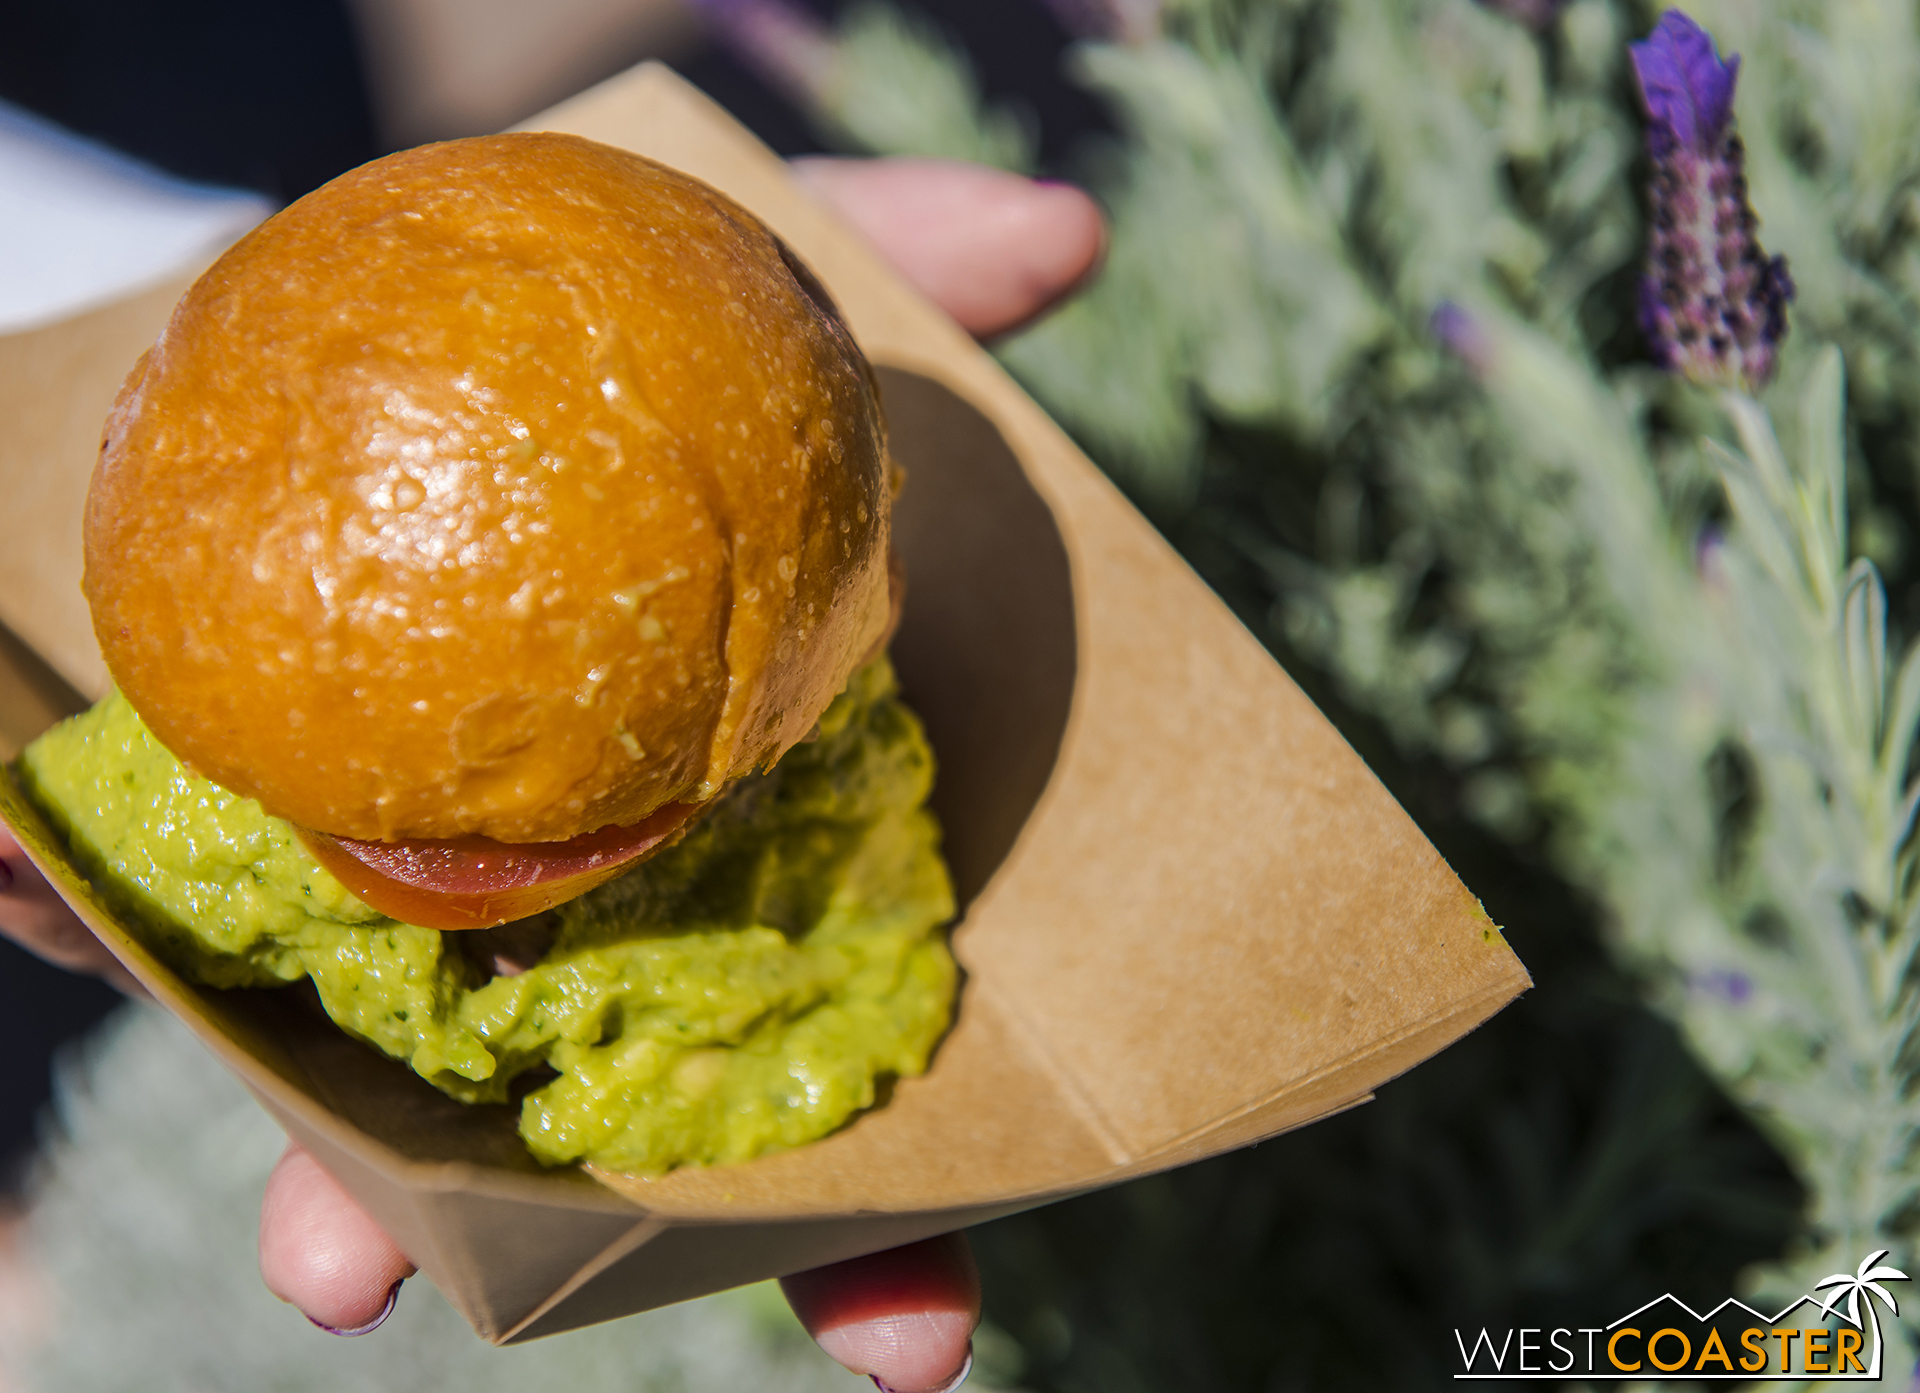  Avocado and Pepper Jack Petite Guacamole Burger @ Avocado Time  One of the big hits of the festival this year, this slider sized bite packs a lot of flavor in a small amount.&nbsp; The beef is advertised as cooked to medium rare but seemed closer to